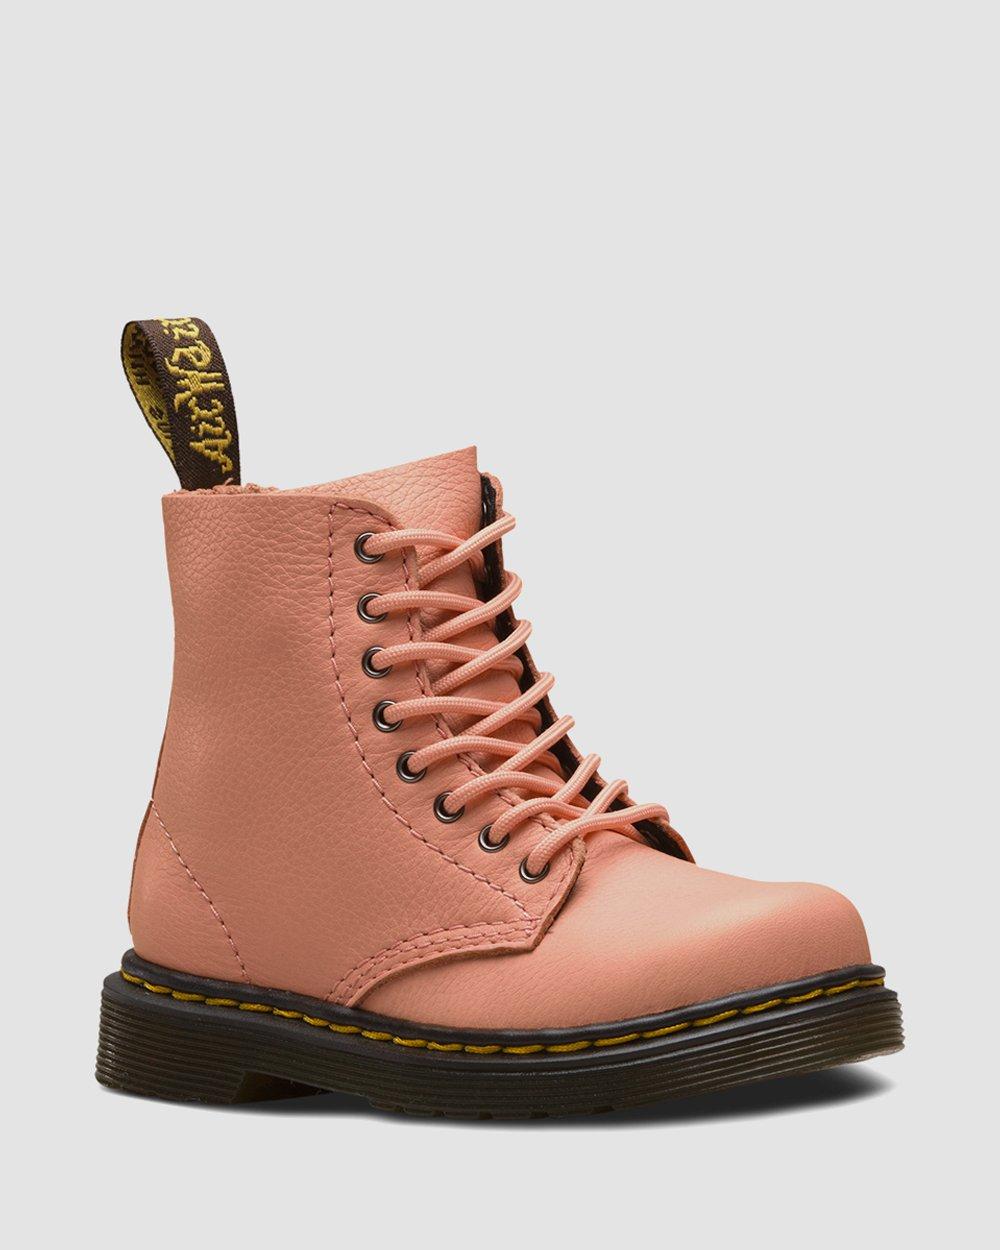 dr martens pink & purple pascal 8 eye boots